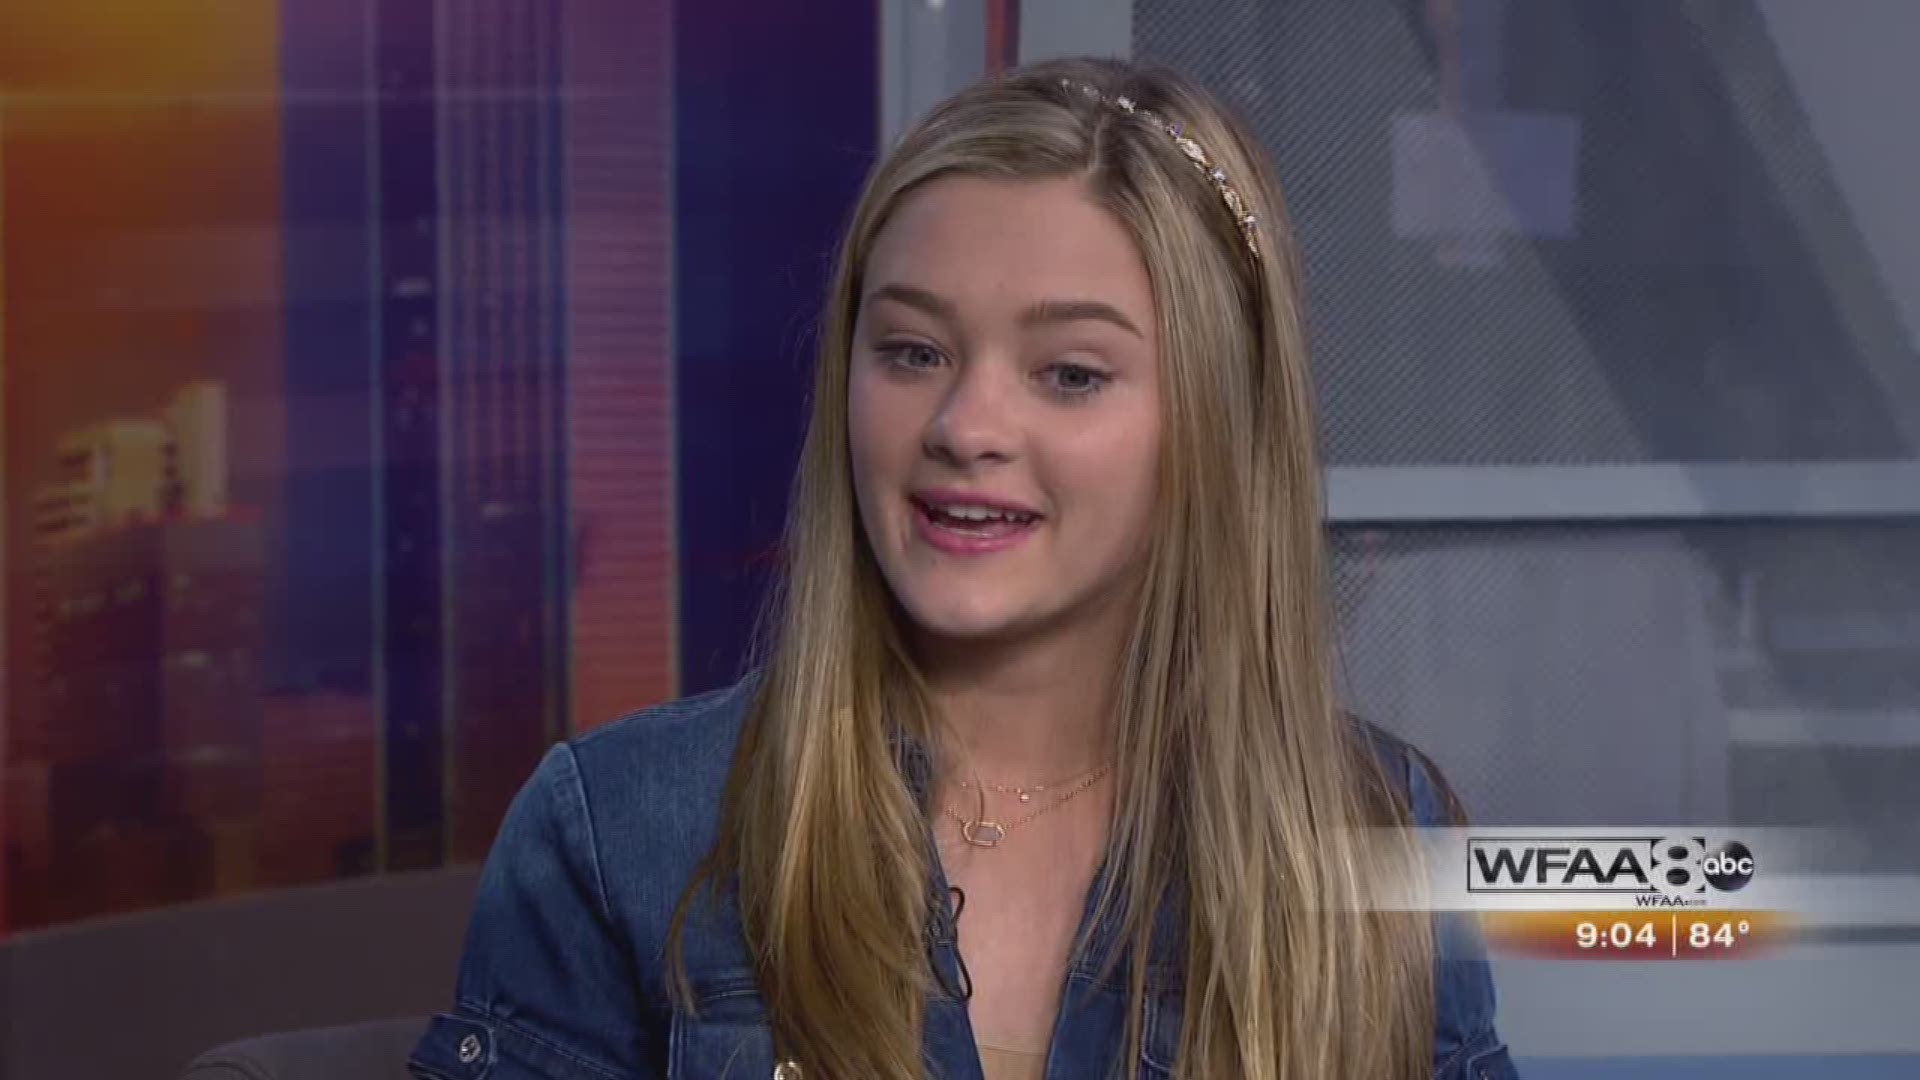 Lizzy Greene 2019 Wallpapers